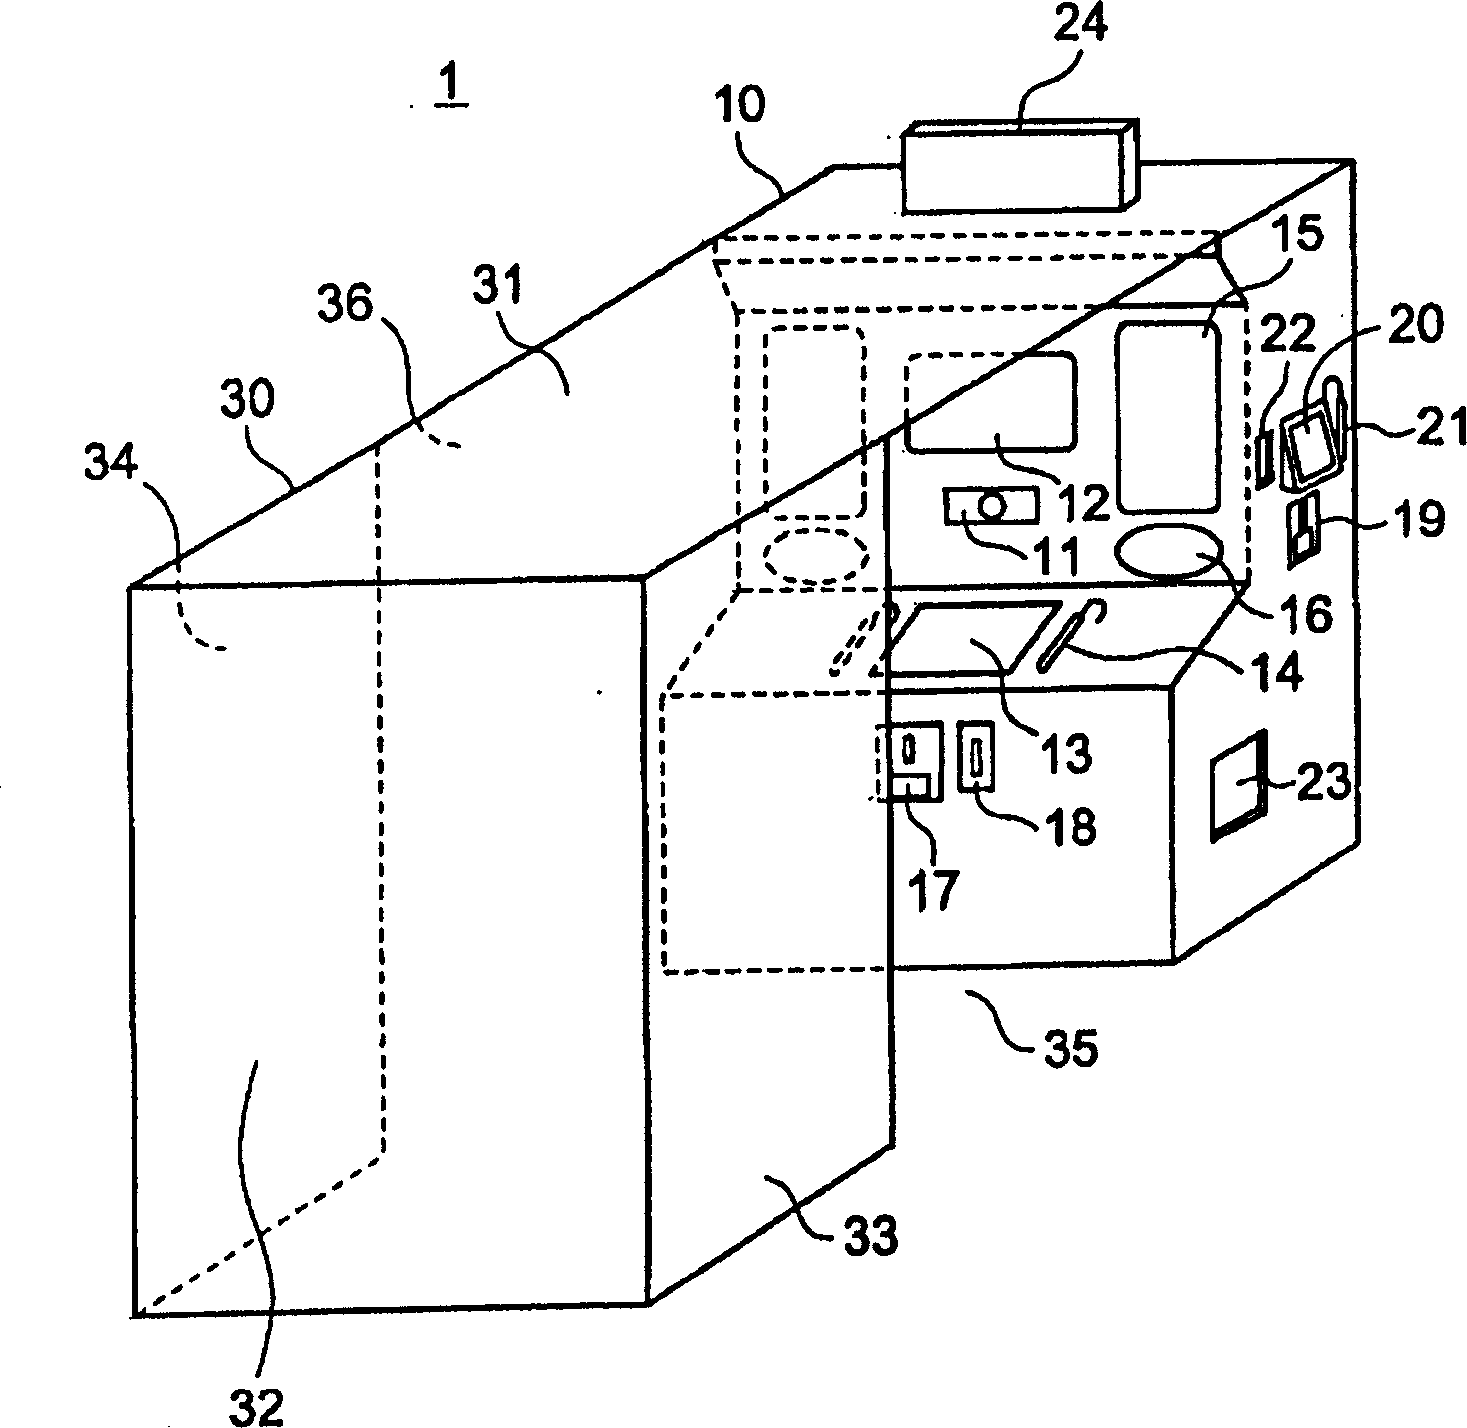 Automatic photographing apparatus